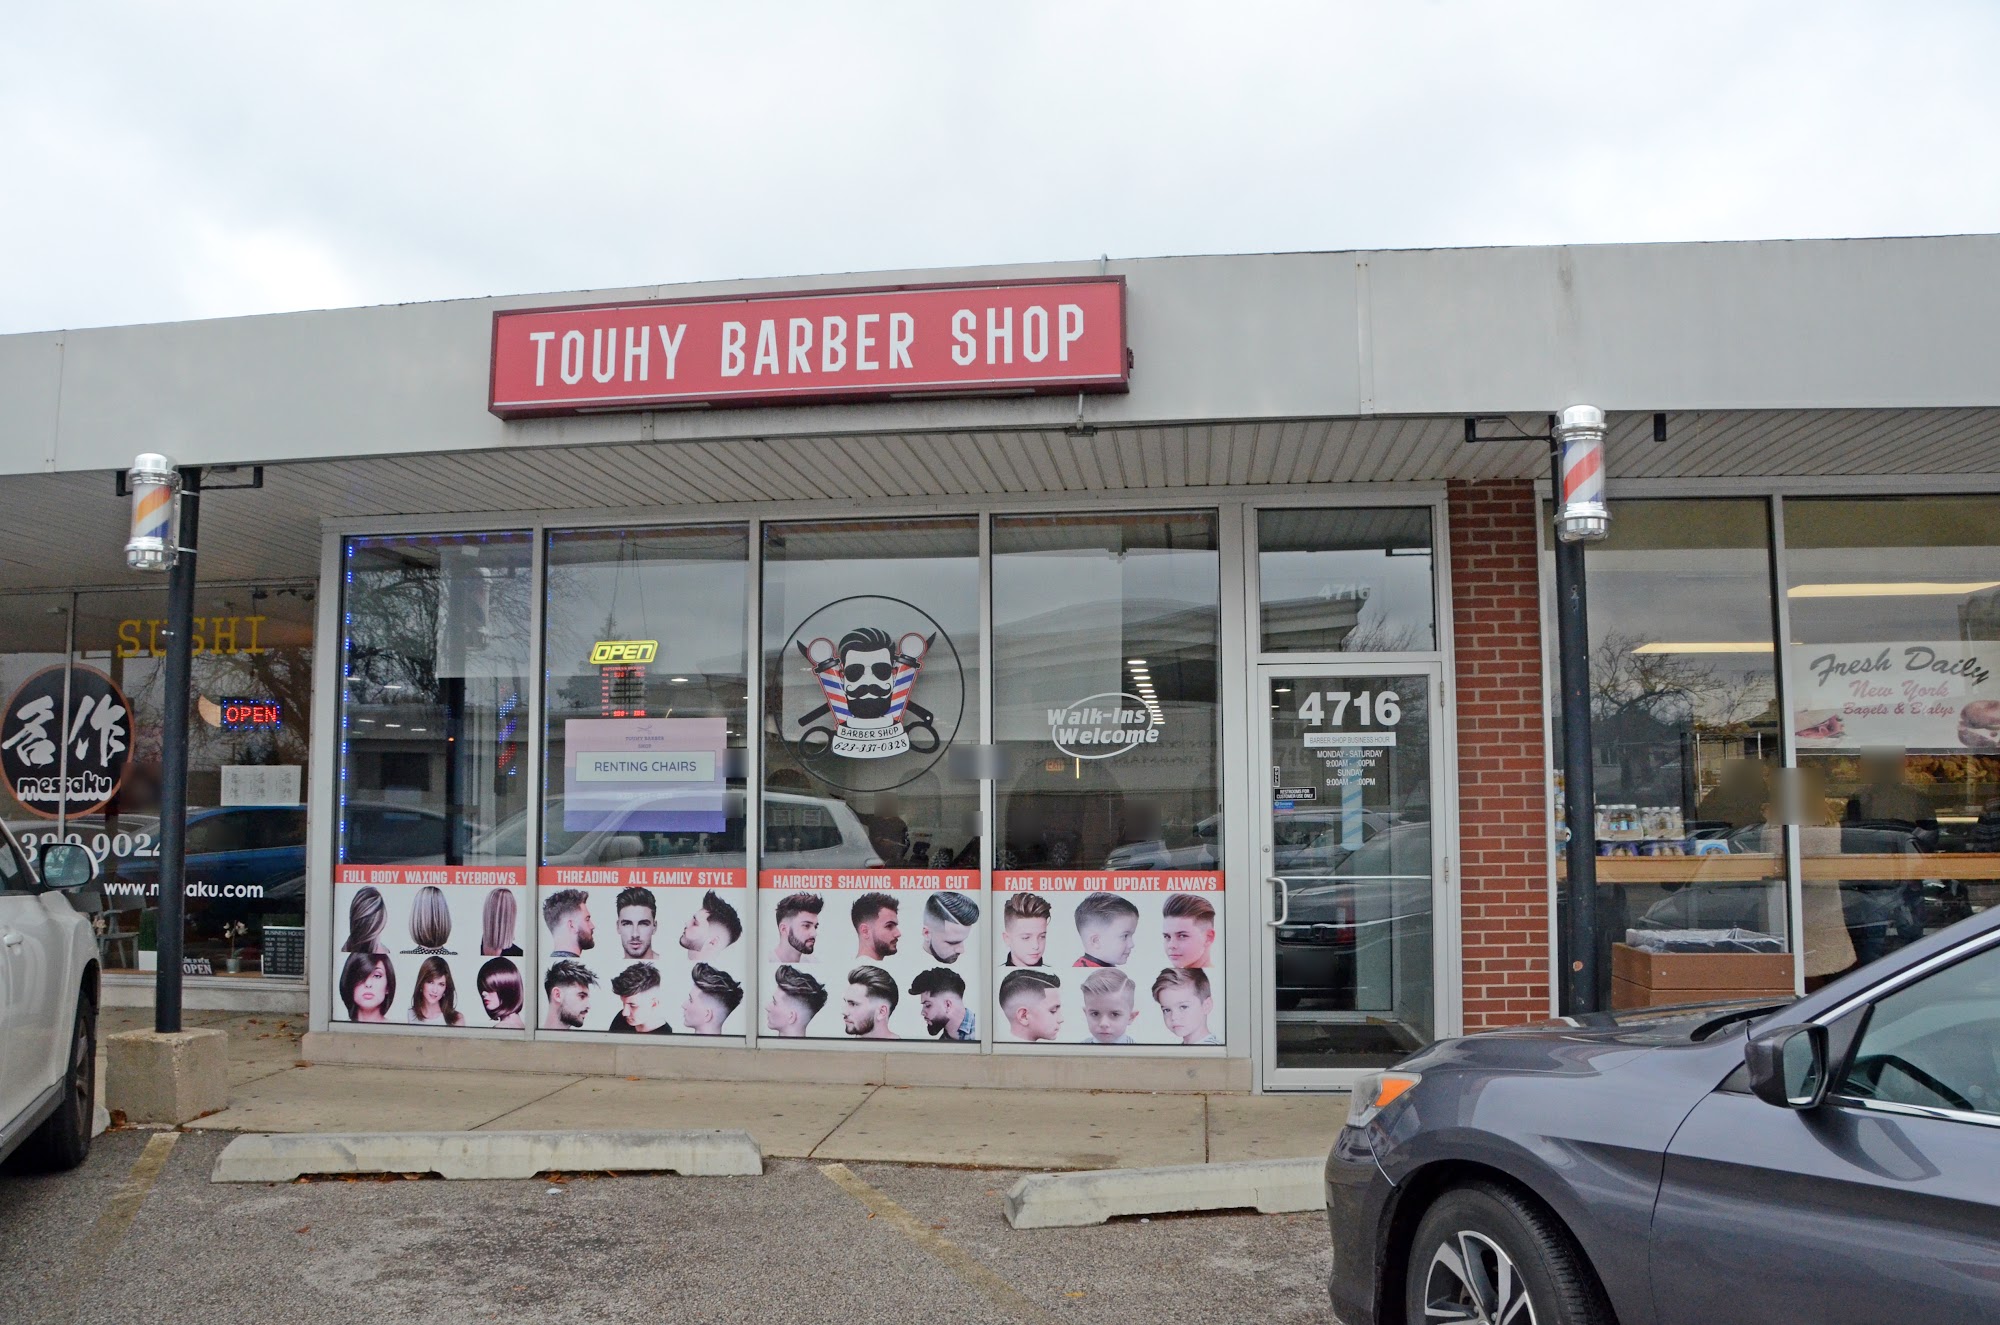 Touhy Barber Shop 4716 W Touhy Ave, Lincolnwood Illinois 60712